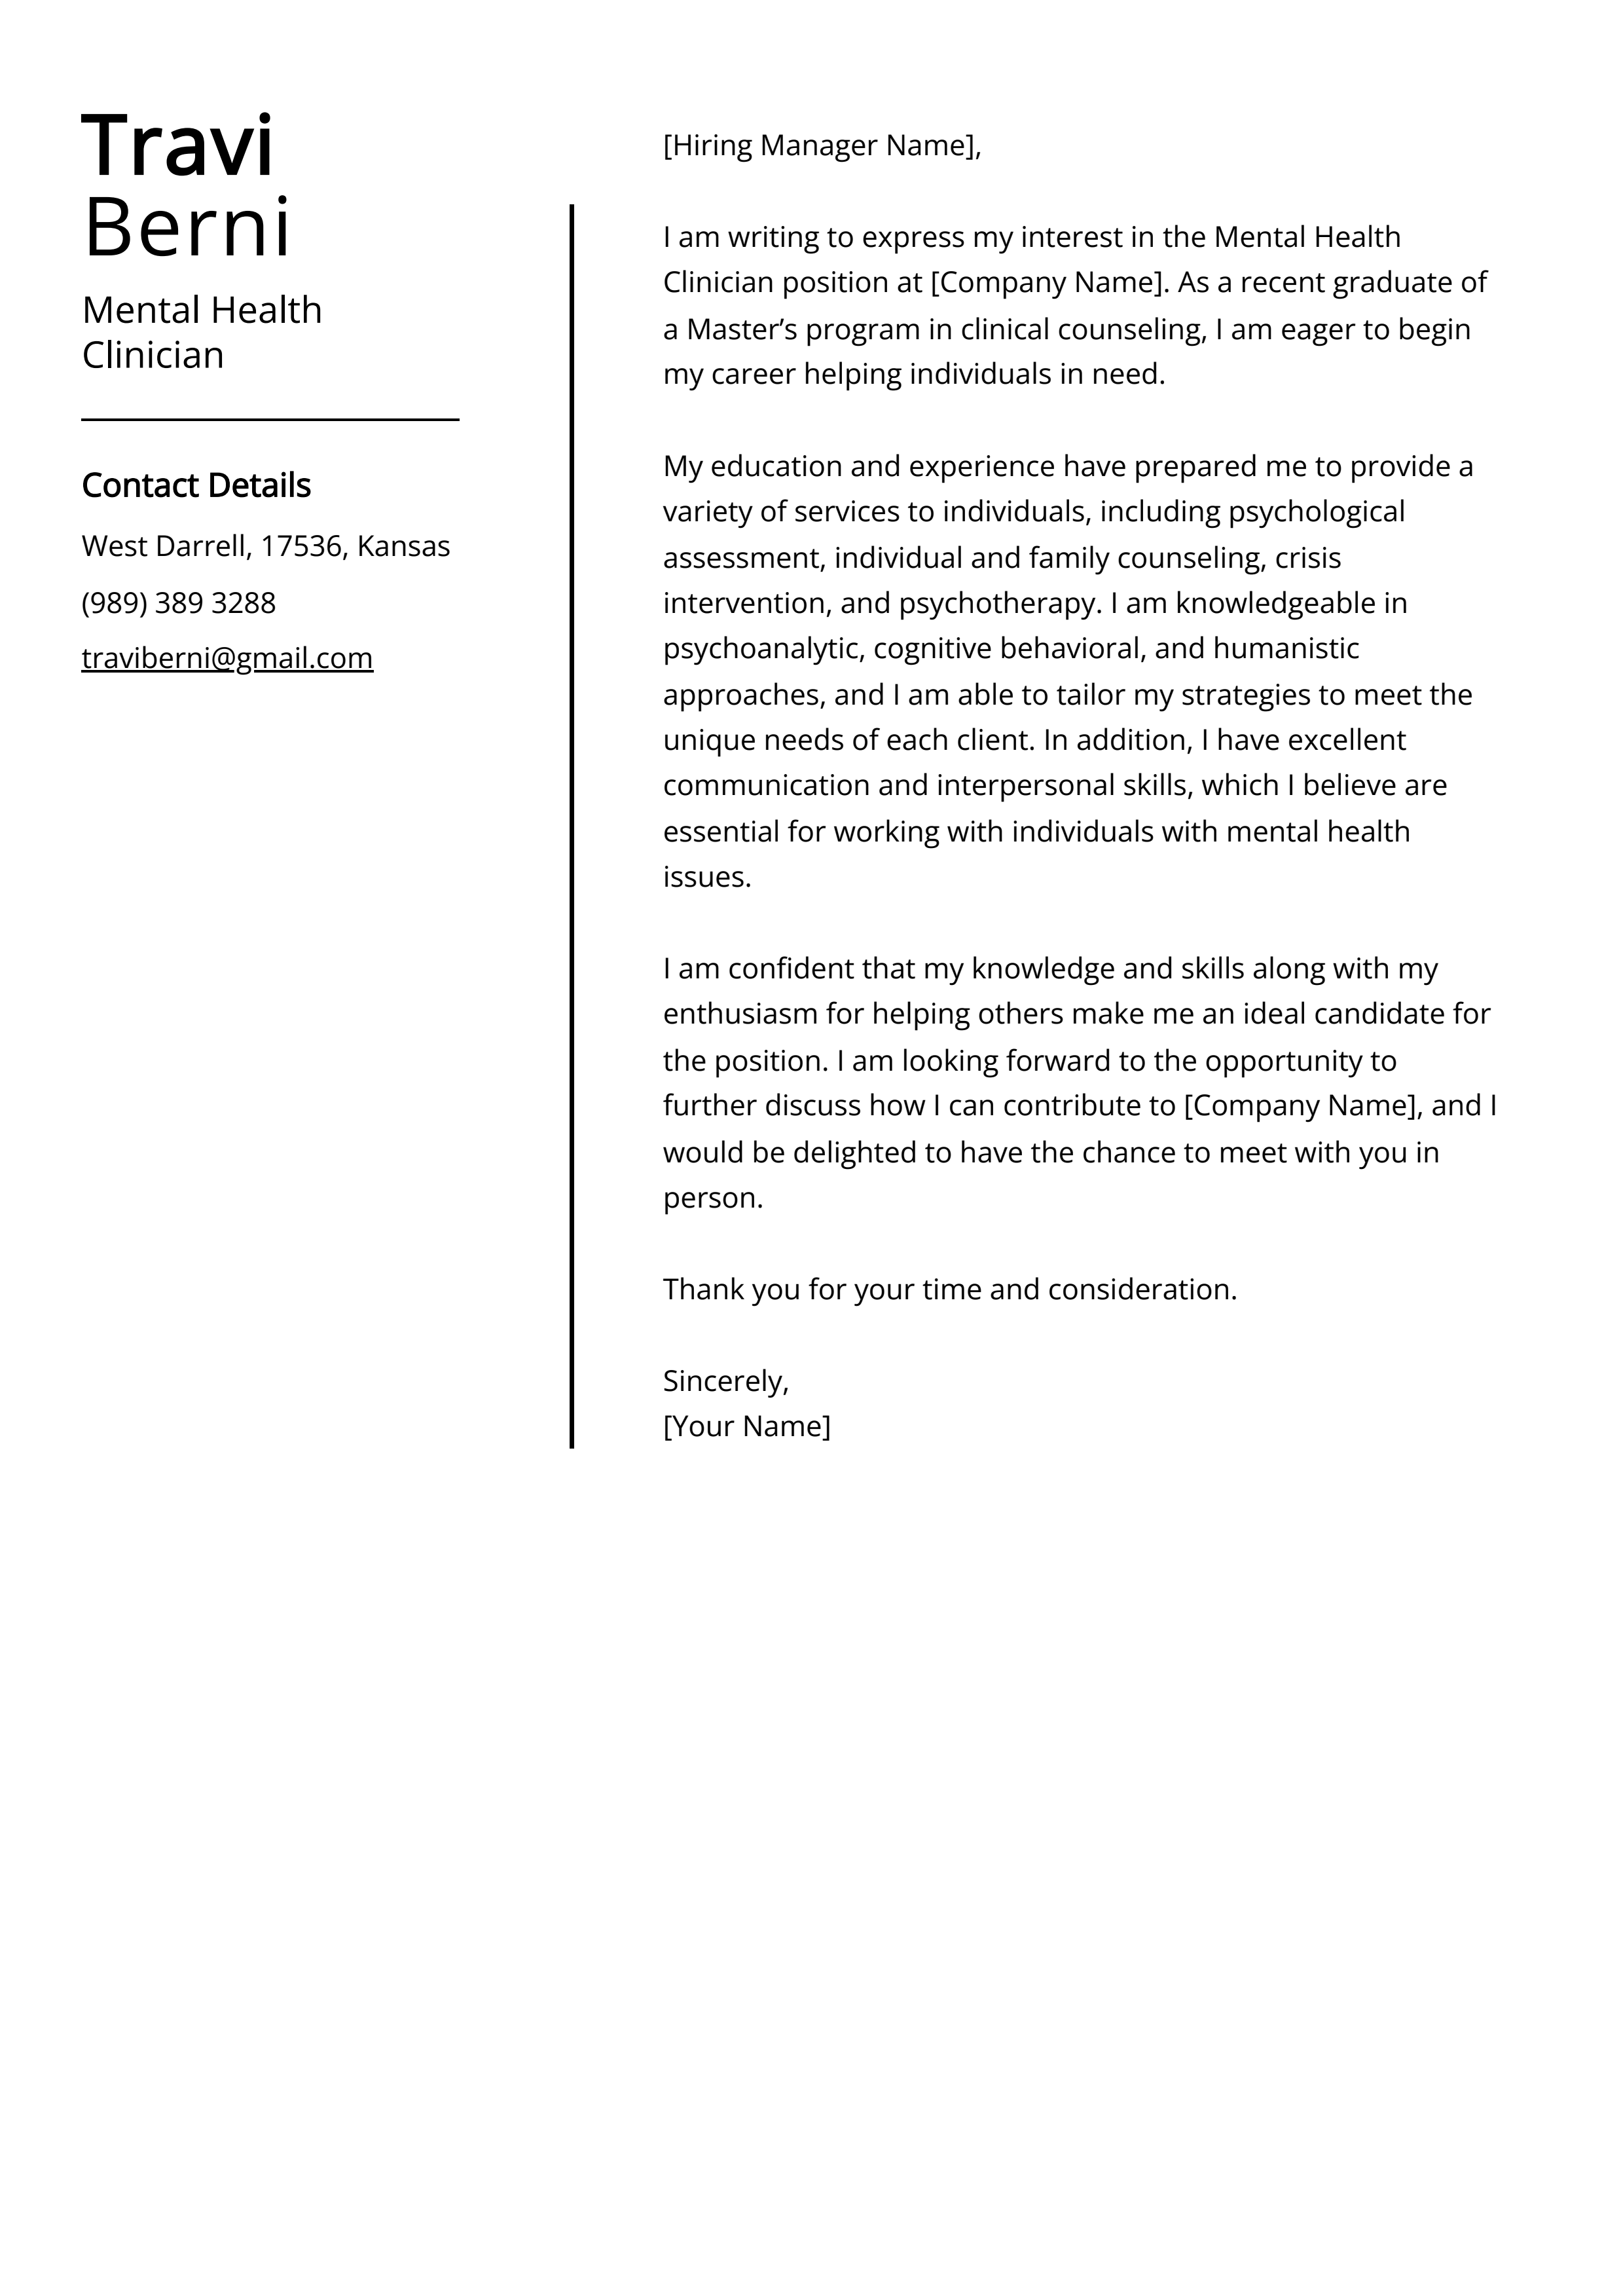 Mental Health Clinician Cover Letter Example